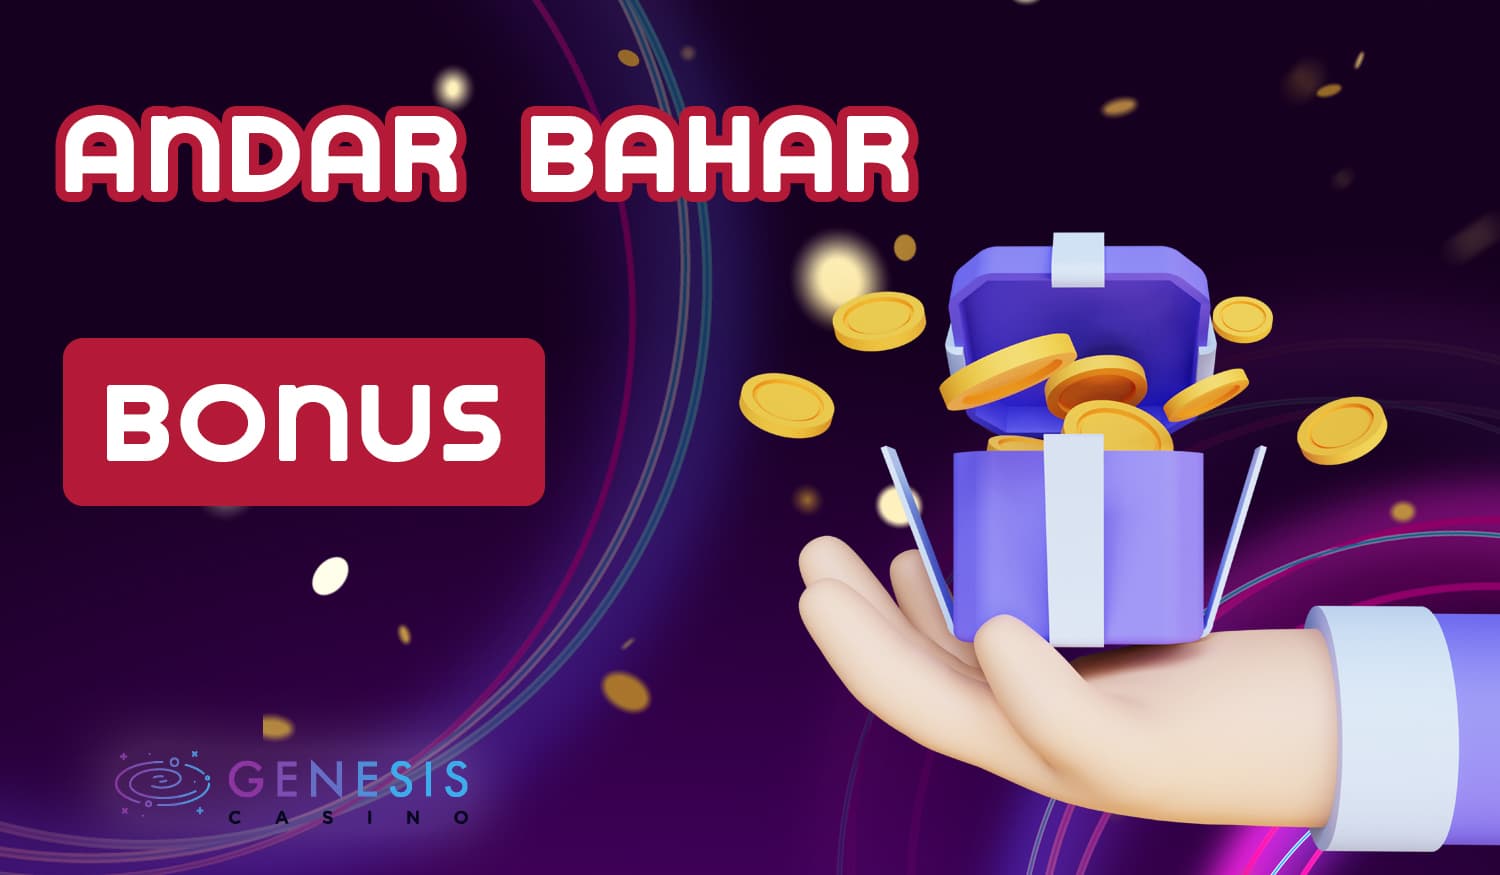 List of promotions and bonuses available at Genesis for Andar Bahar game